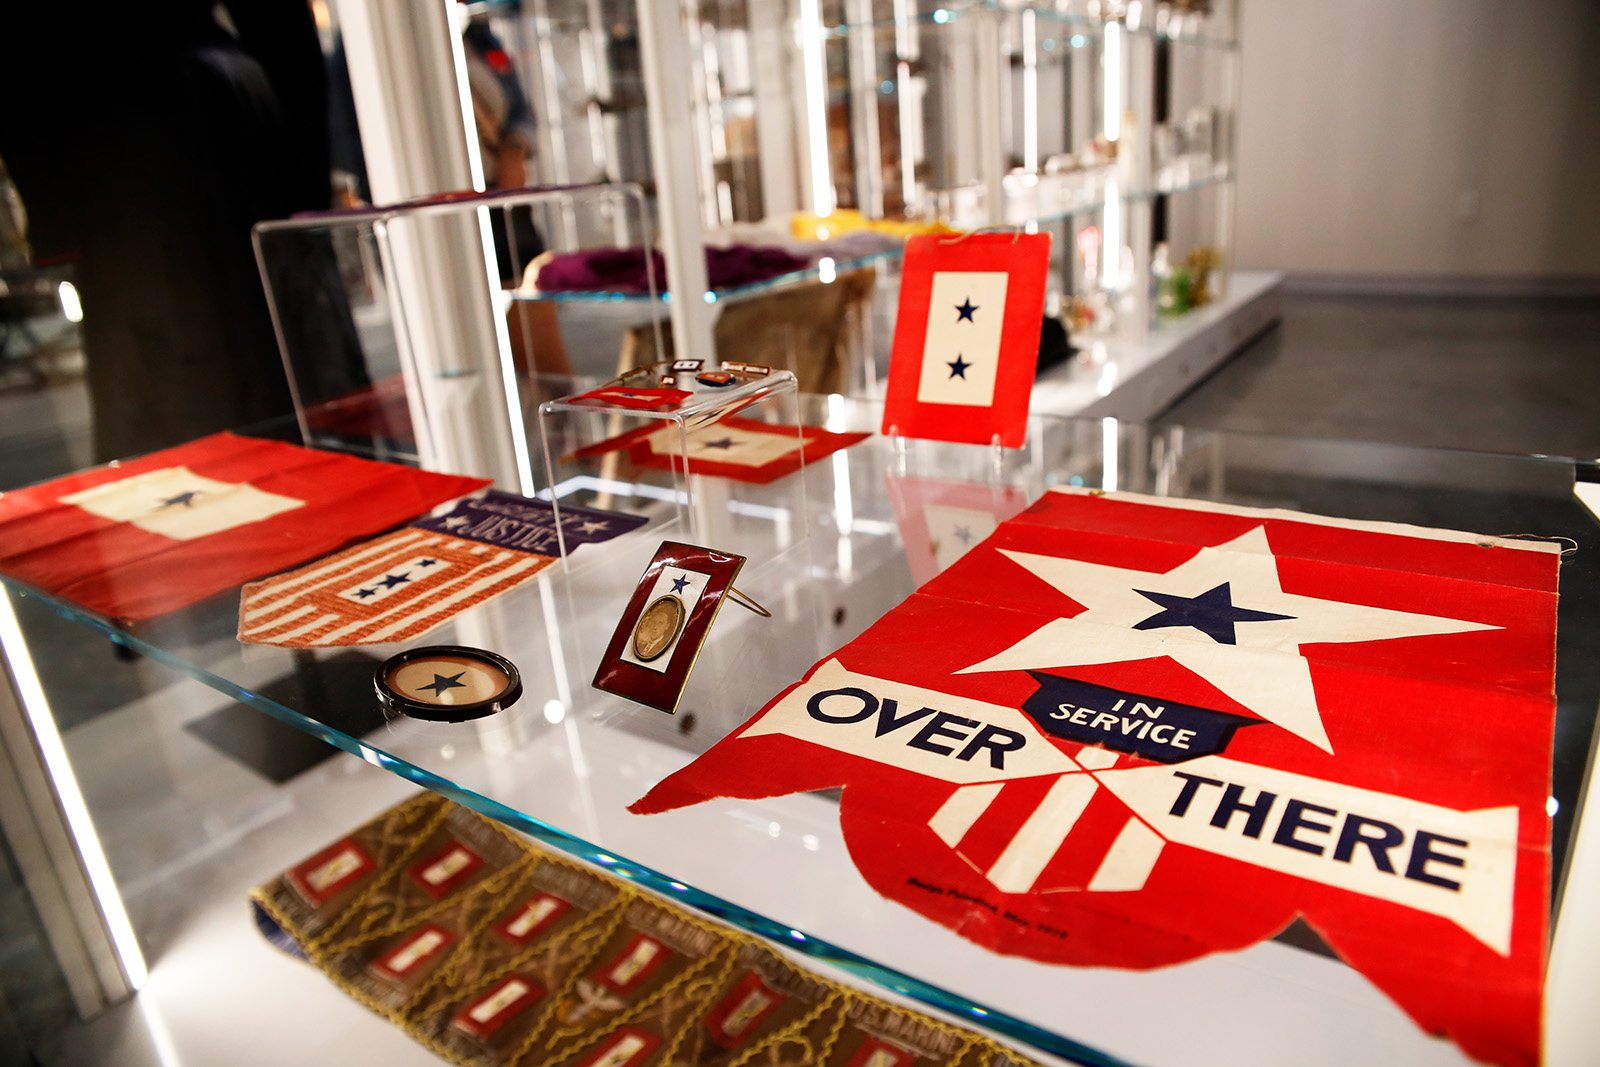 Modern photograph of an array of flags, banners, cards, pins and other memorabilia all displaying blue stars of different designs.